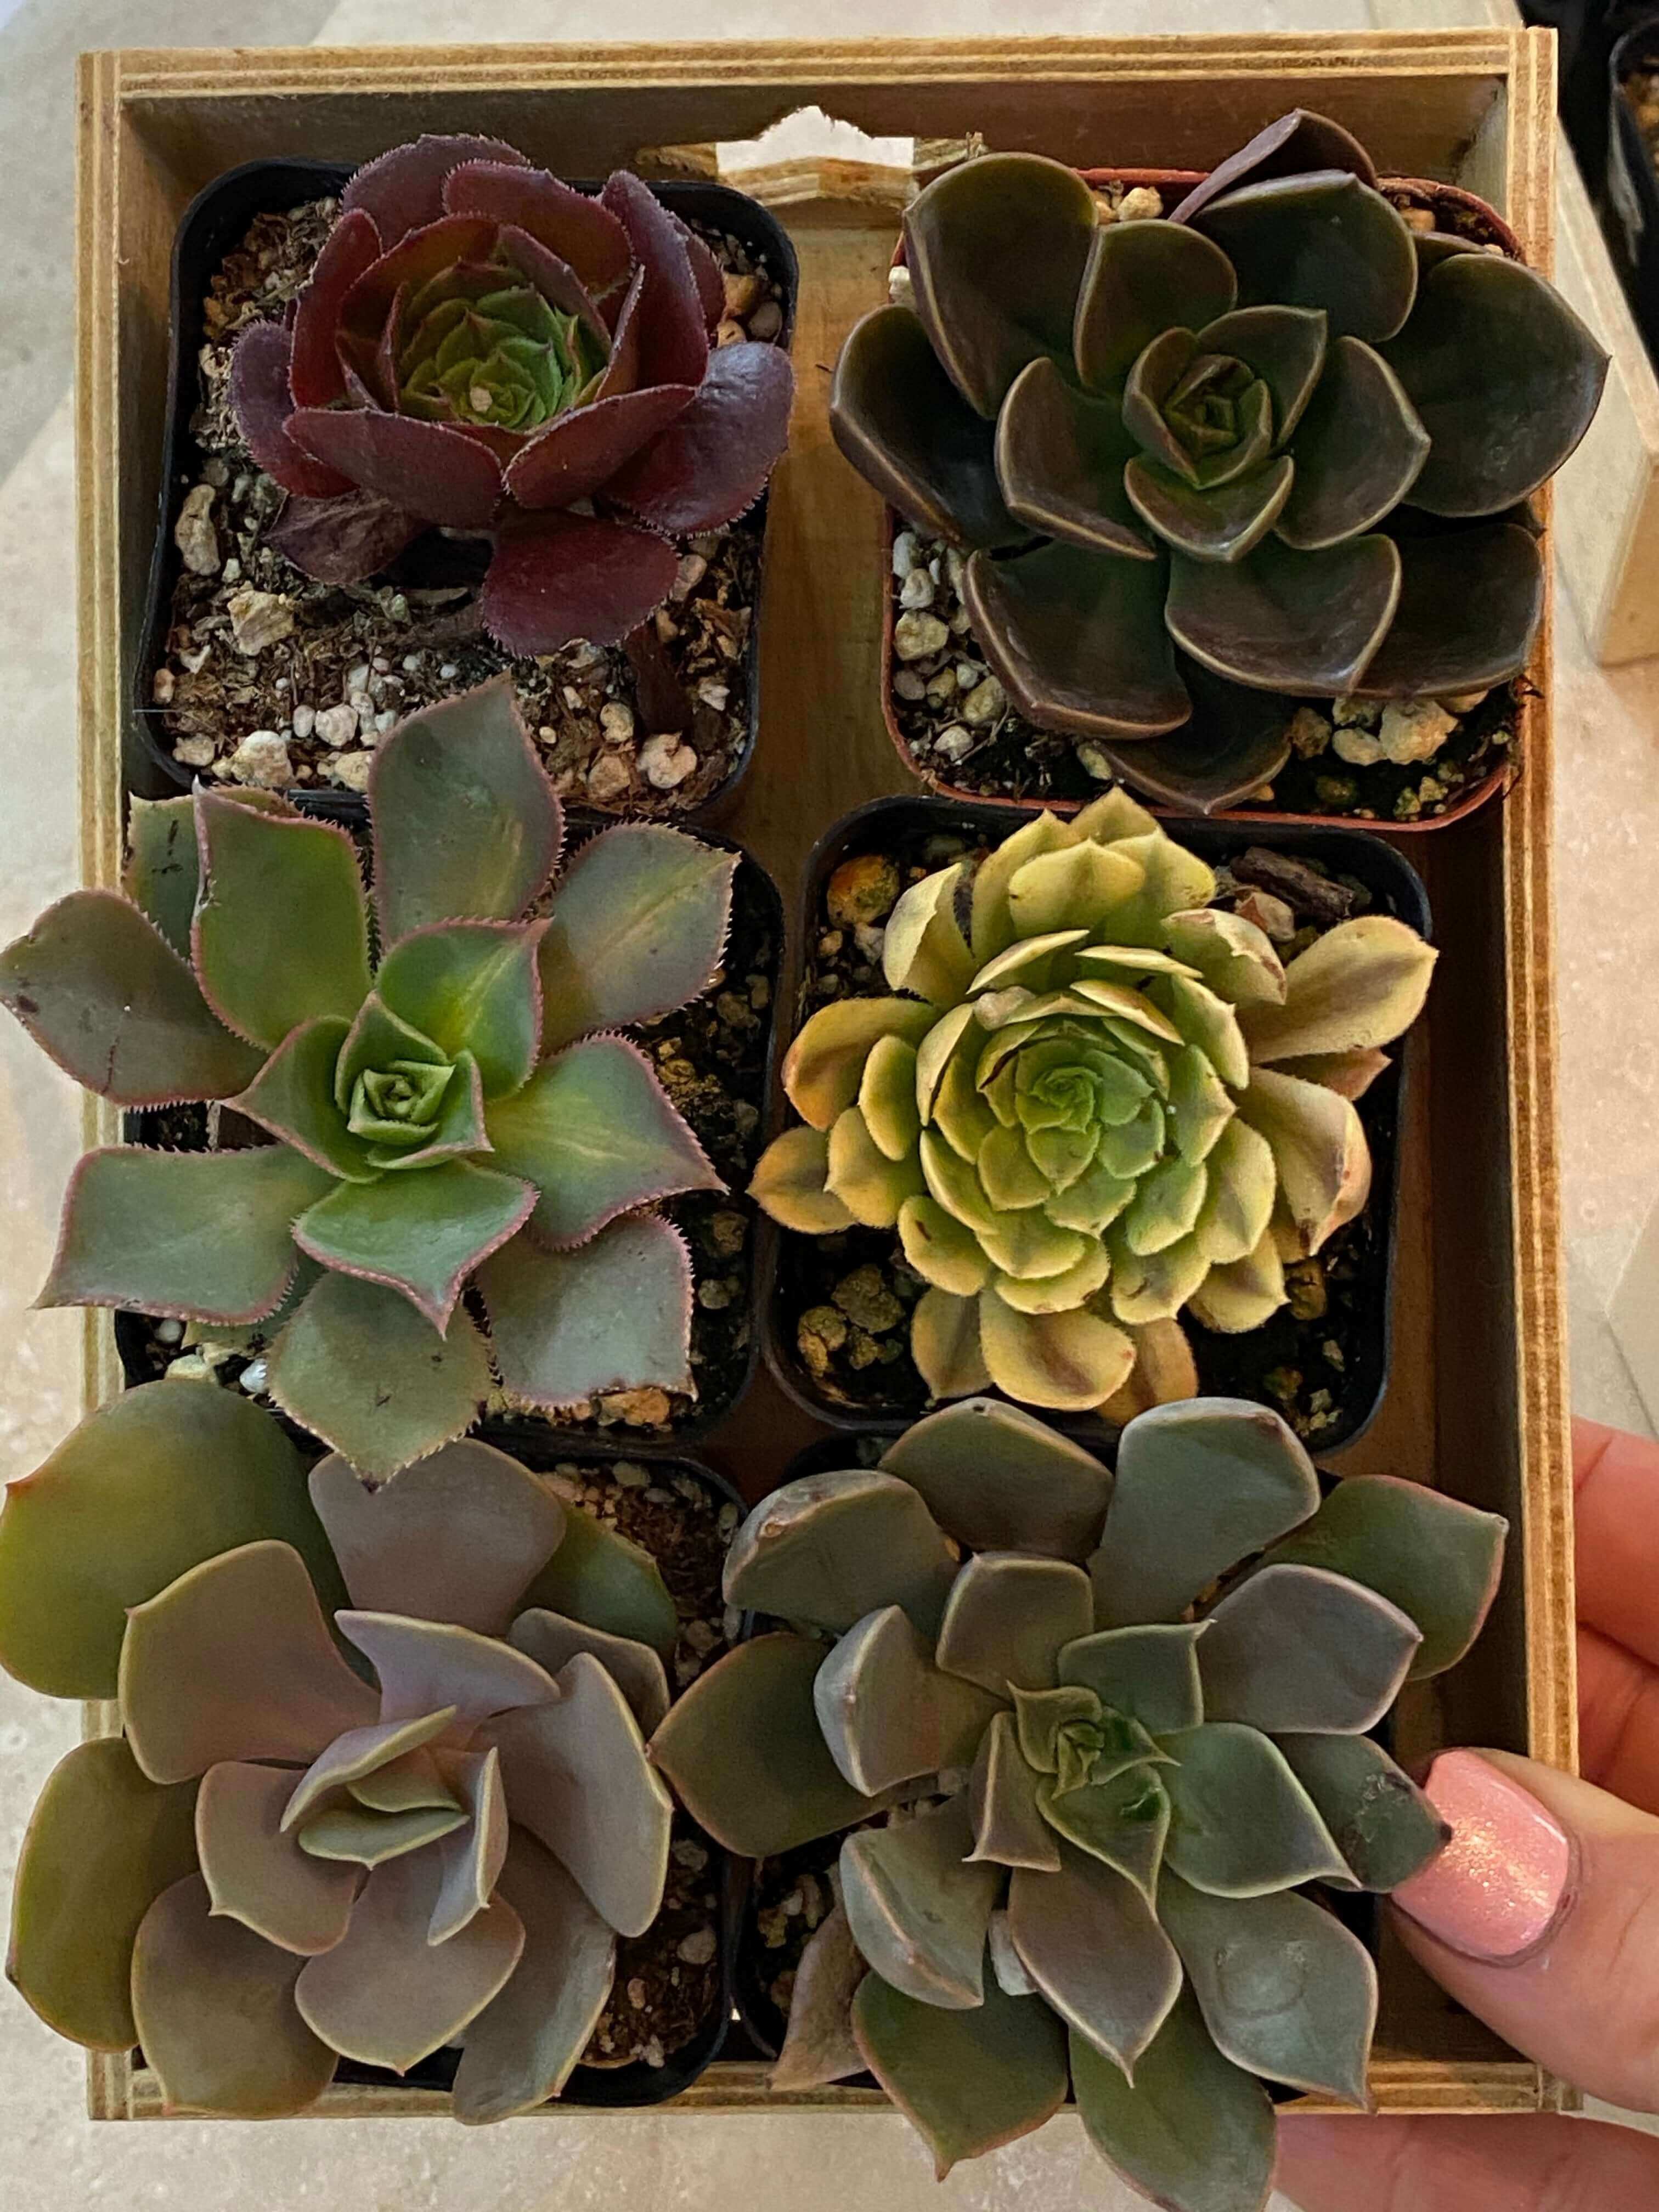 Collection of six small succulents, each distinct in shape and color, arranged together for display.